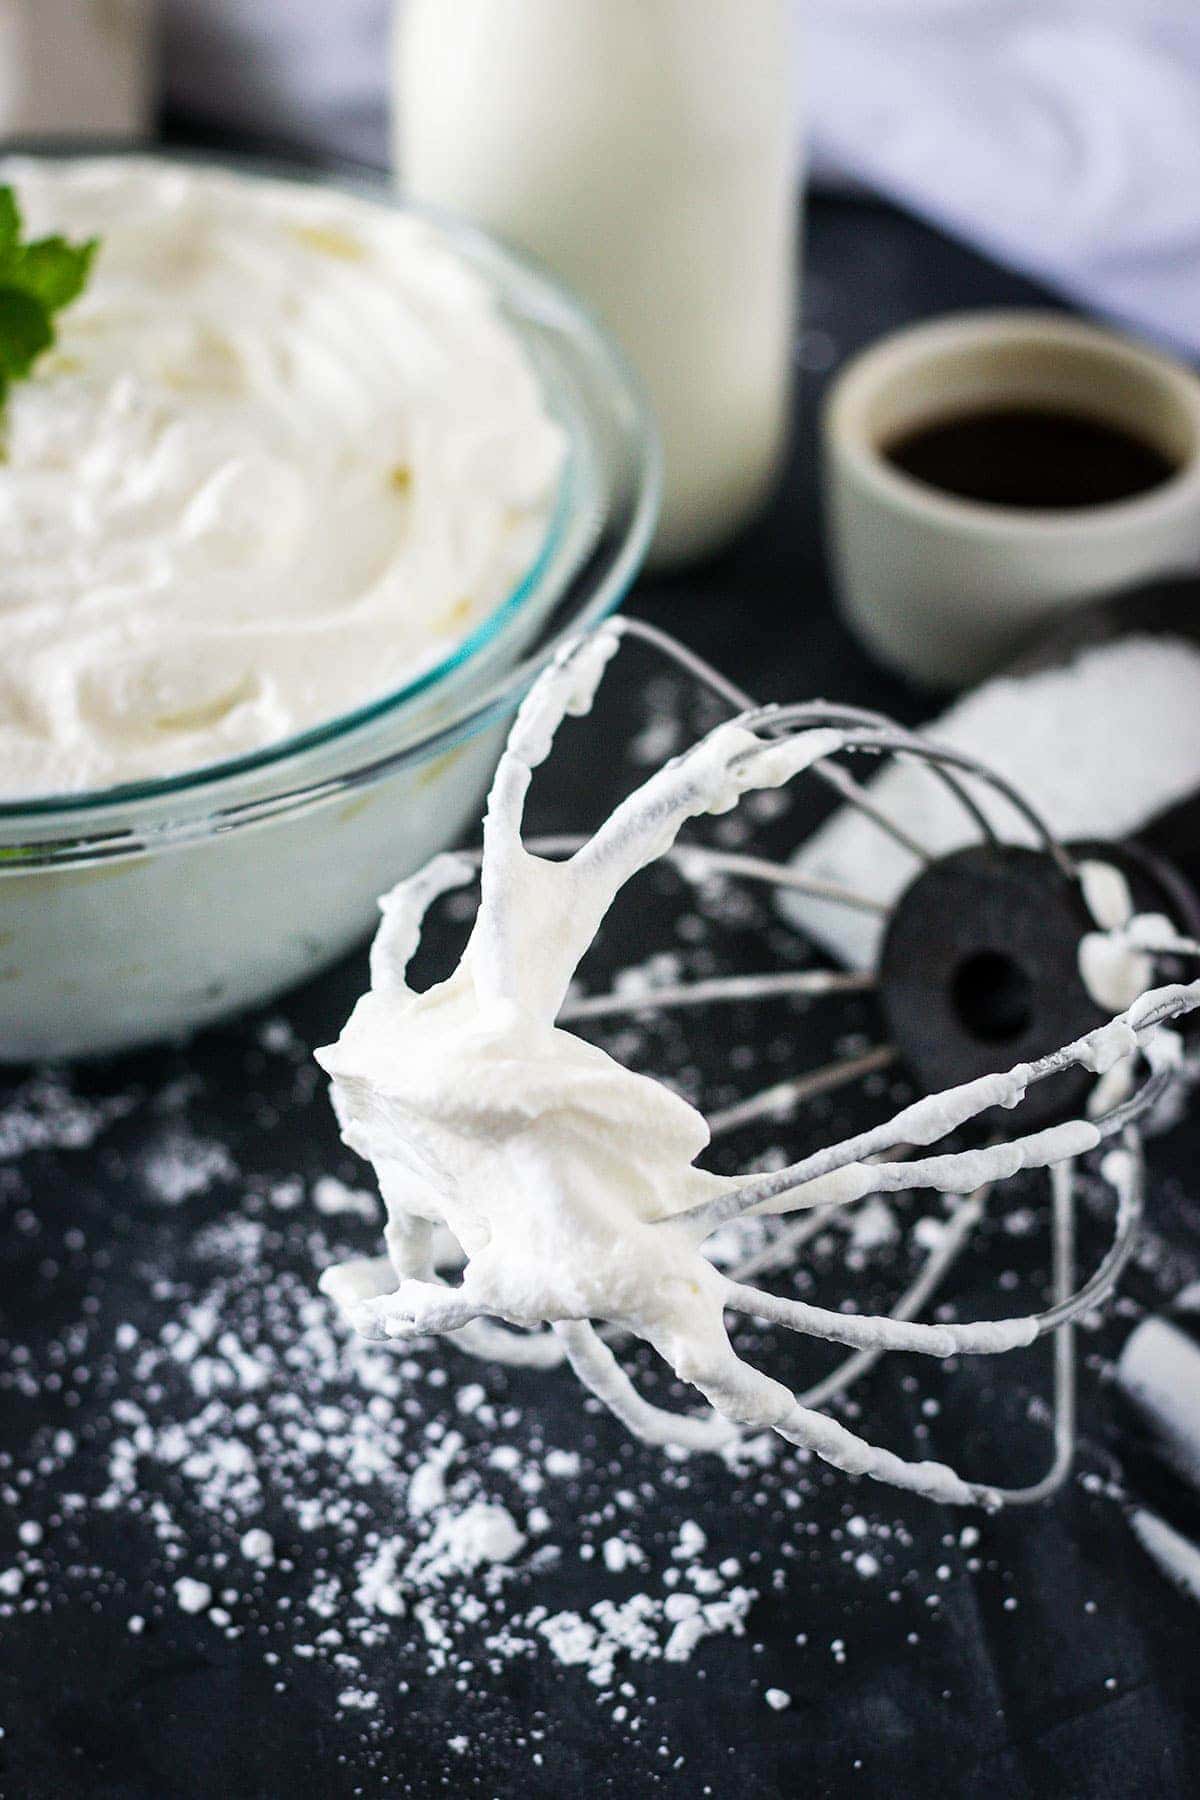 https://www.soulfullymade.com/wp-content/uploads/2020/09/Perfect-Homemade-Whipped-Cream-Recipe.jpg